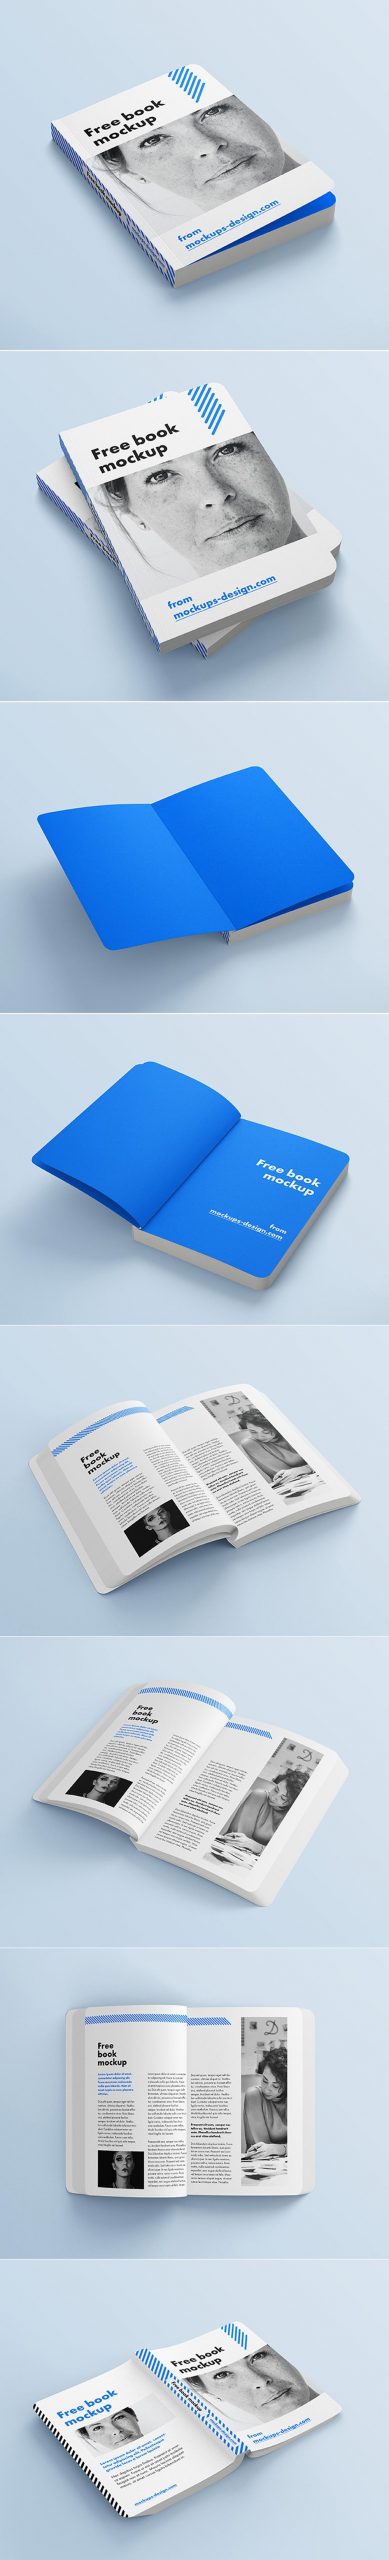 Rounded Book Mockup Free downloadRounded Book Mockup Free download